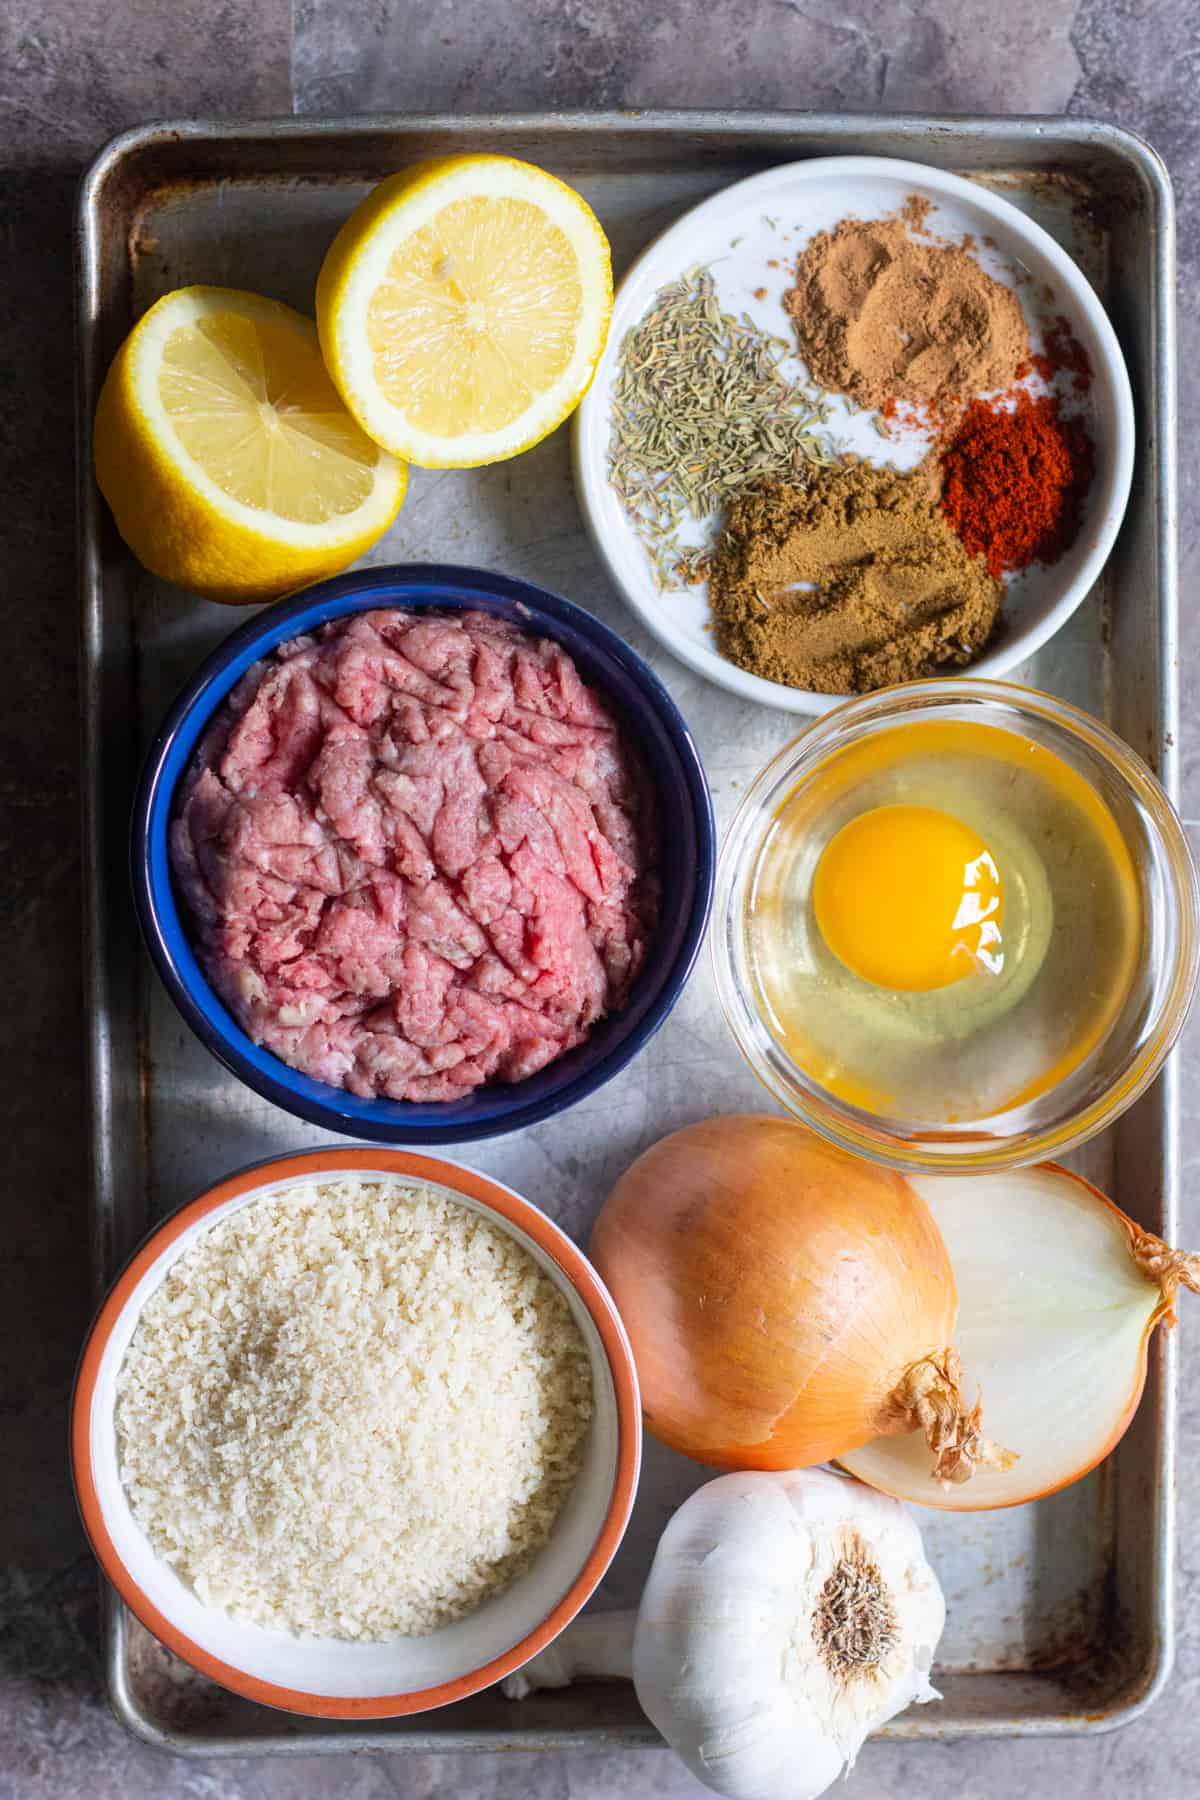 Greek meatballs are made of beef and lamb, egg, onion, bread crumbs, garlic, lemon and spices. 